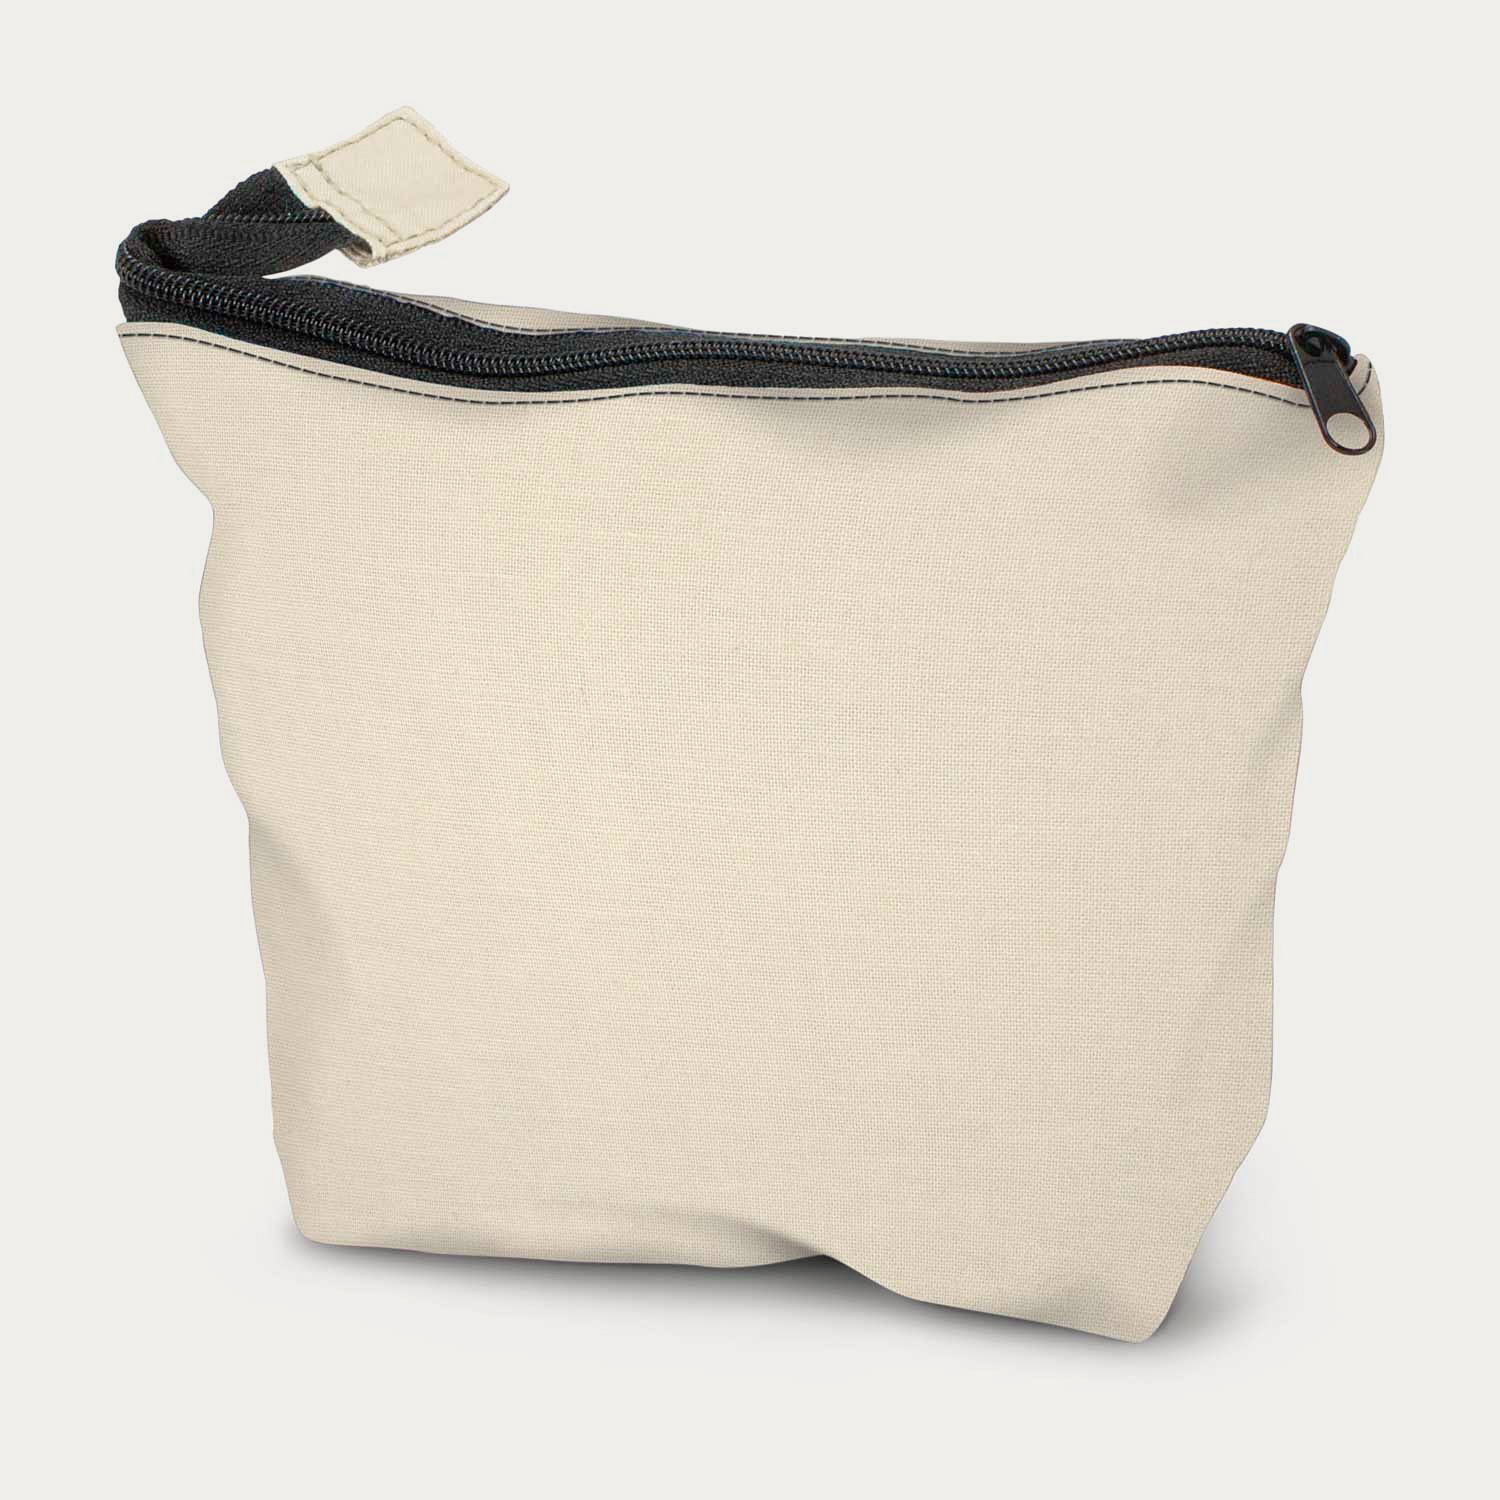 Trento Cosmetic Bag | PrimoProducts